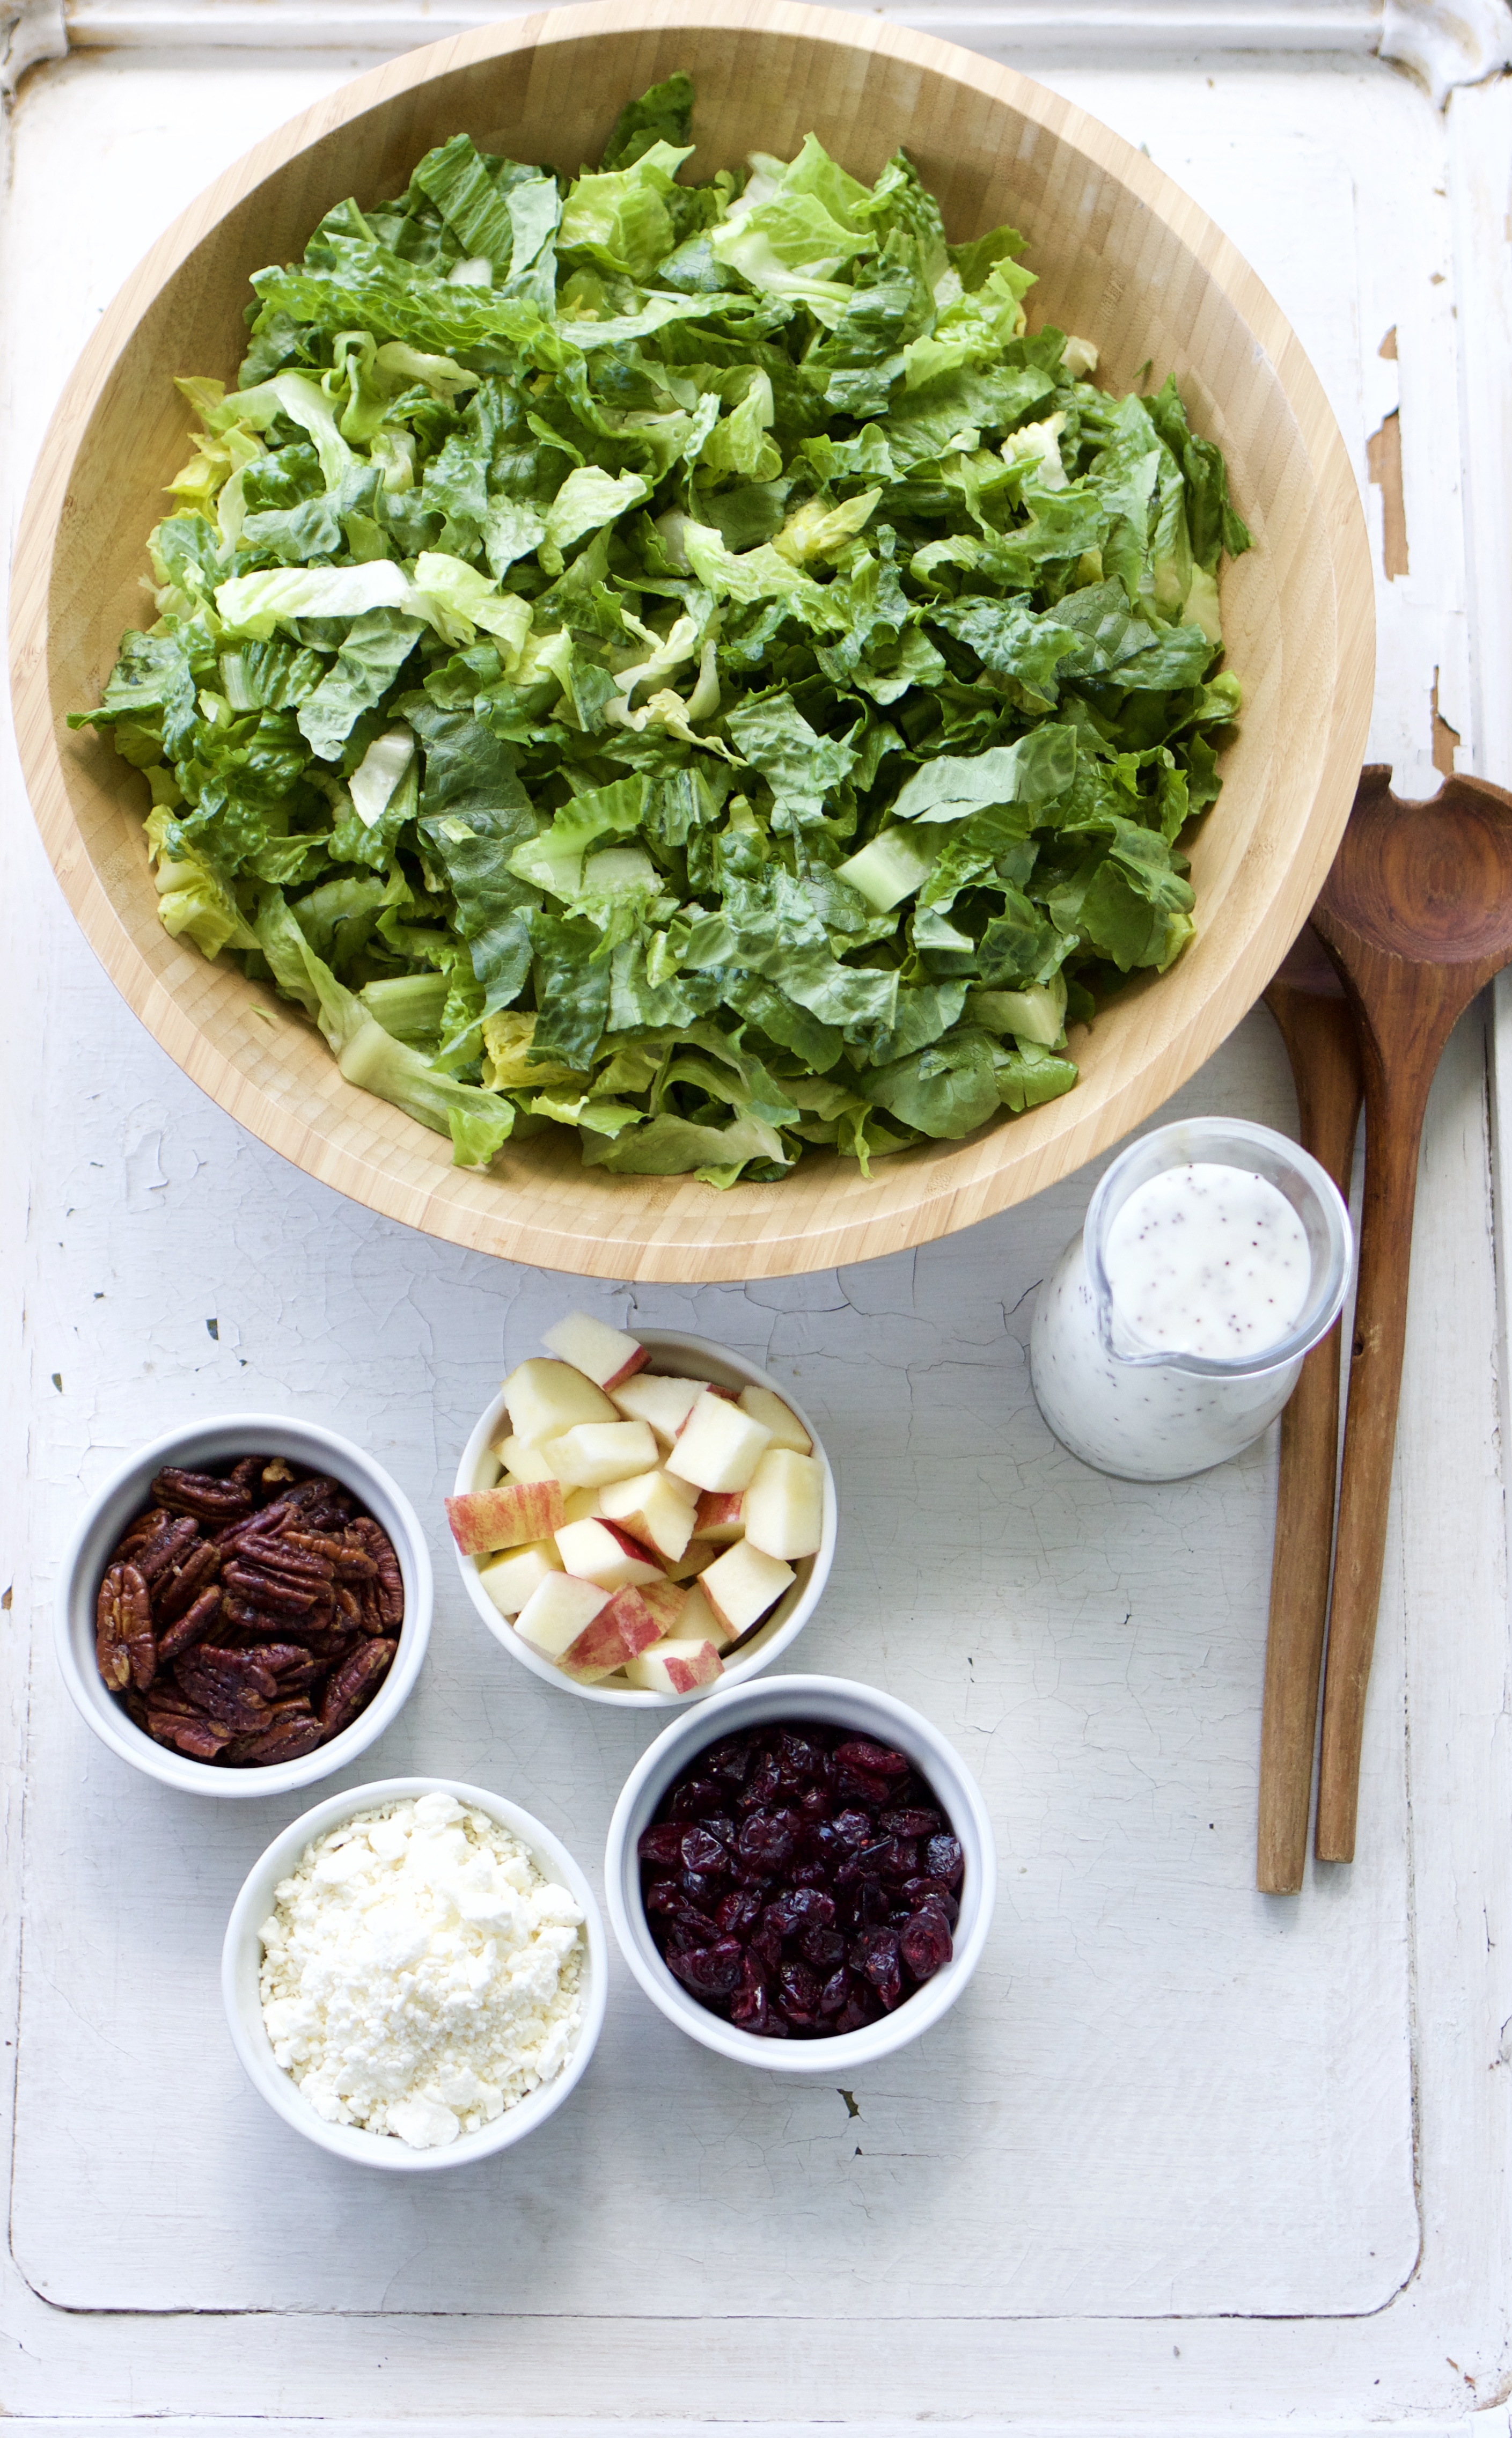 Apple, Feta and Spiced Pecan Salad with Poppyseed Dressing